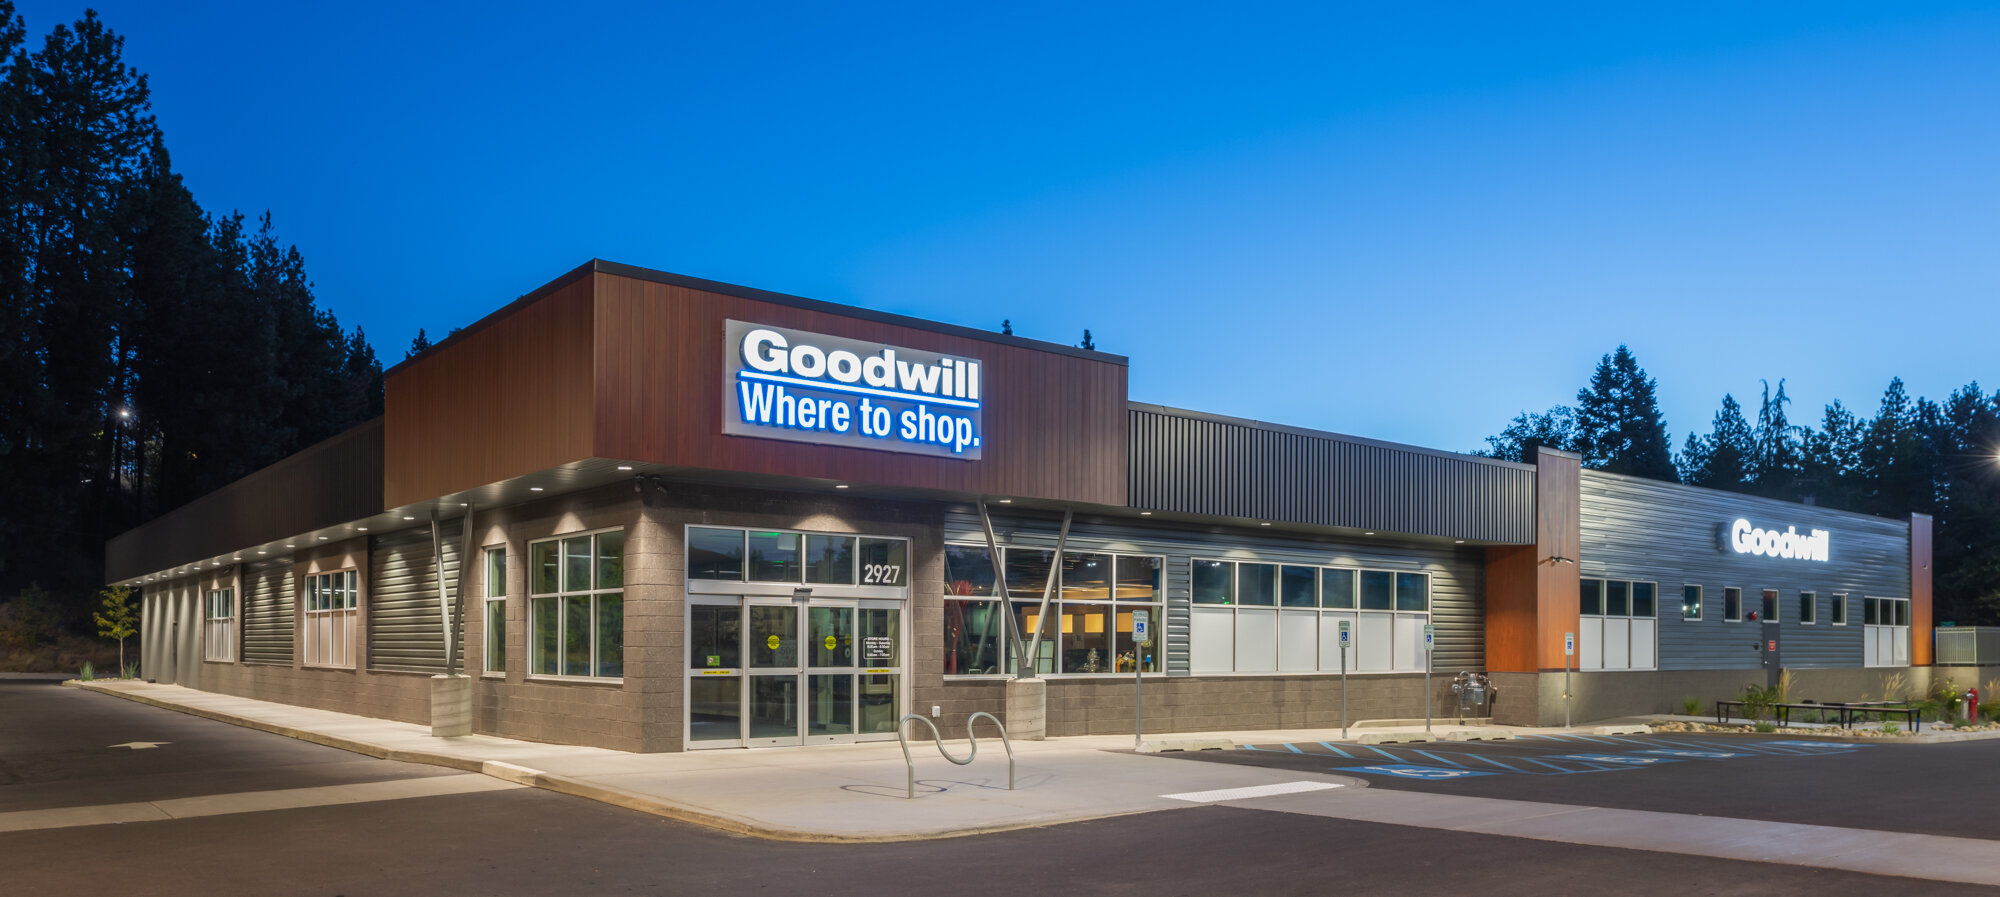 6 Goodwill-Lo-Res-2.jpg